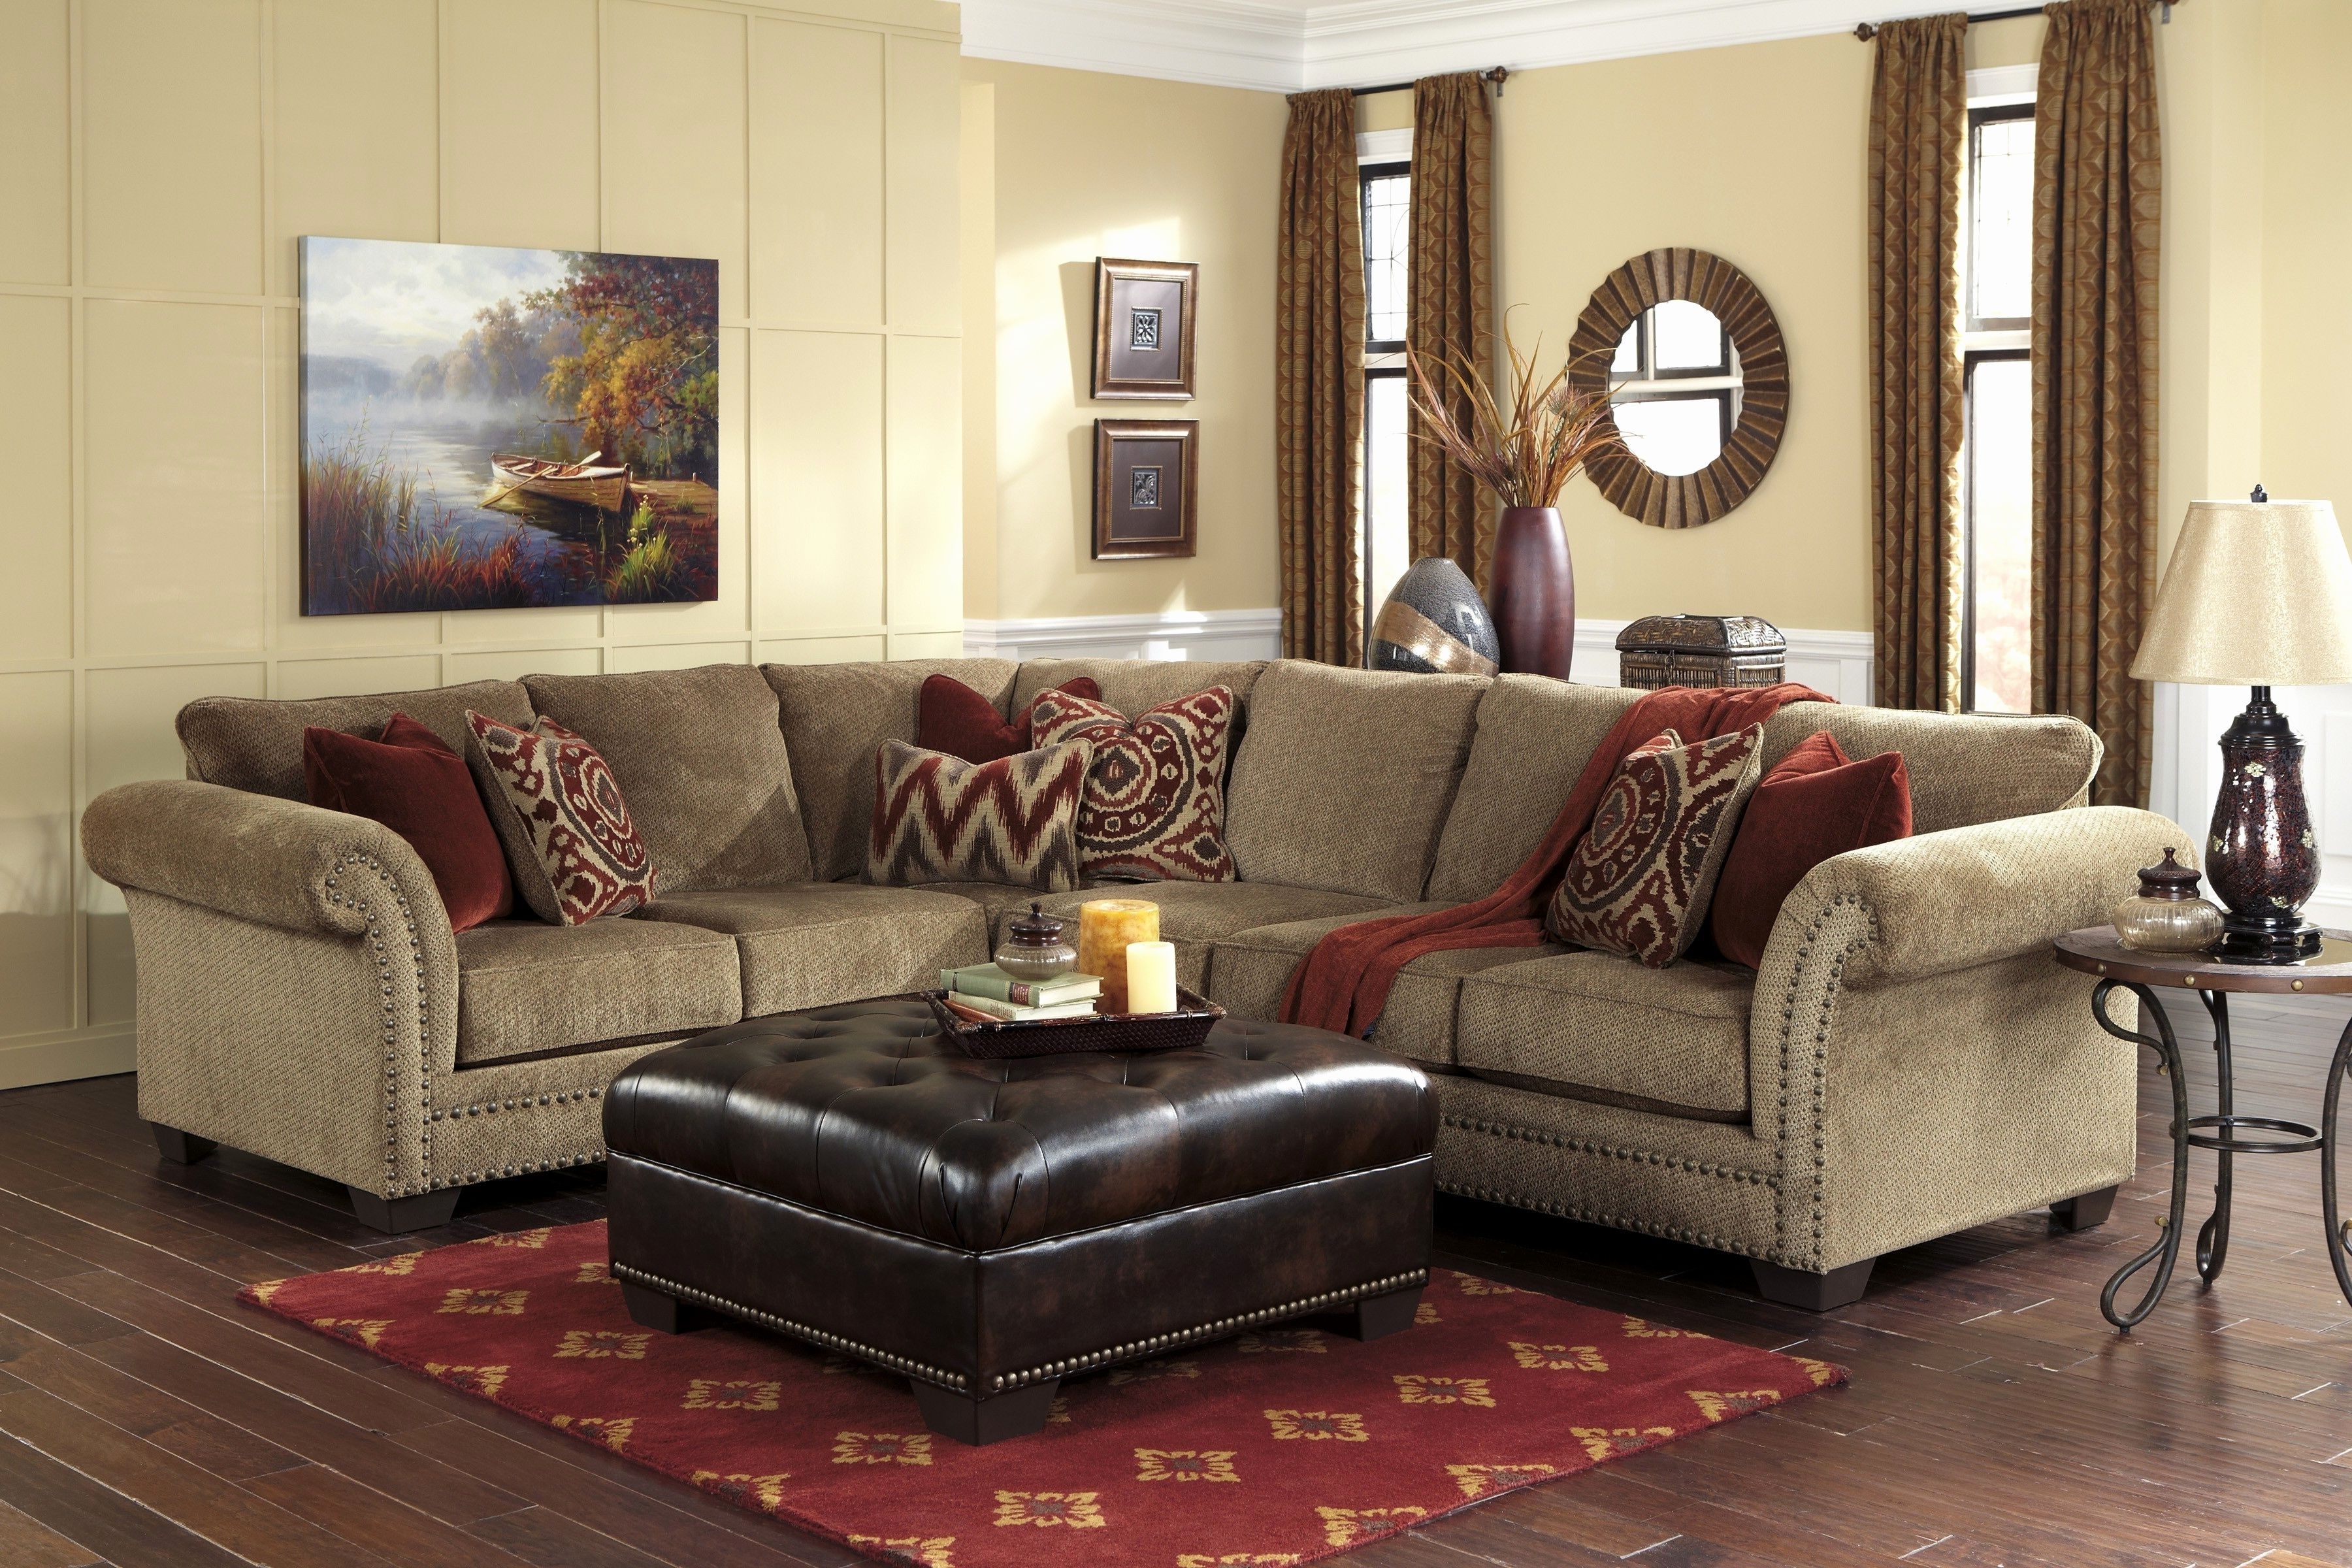 Best And Newest Best Of Sectional Sofa With Oversized Ottoman Graphics 88 Creative With Regard To Sectional Sofas With Oversized Ottoman (View 14 of 20)